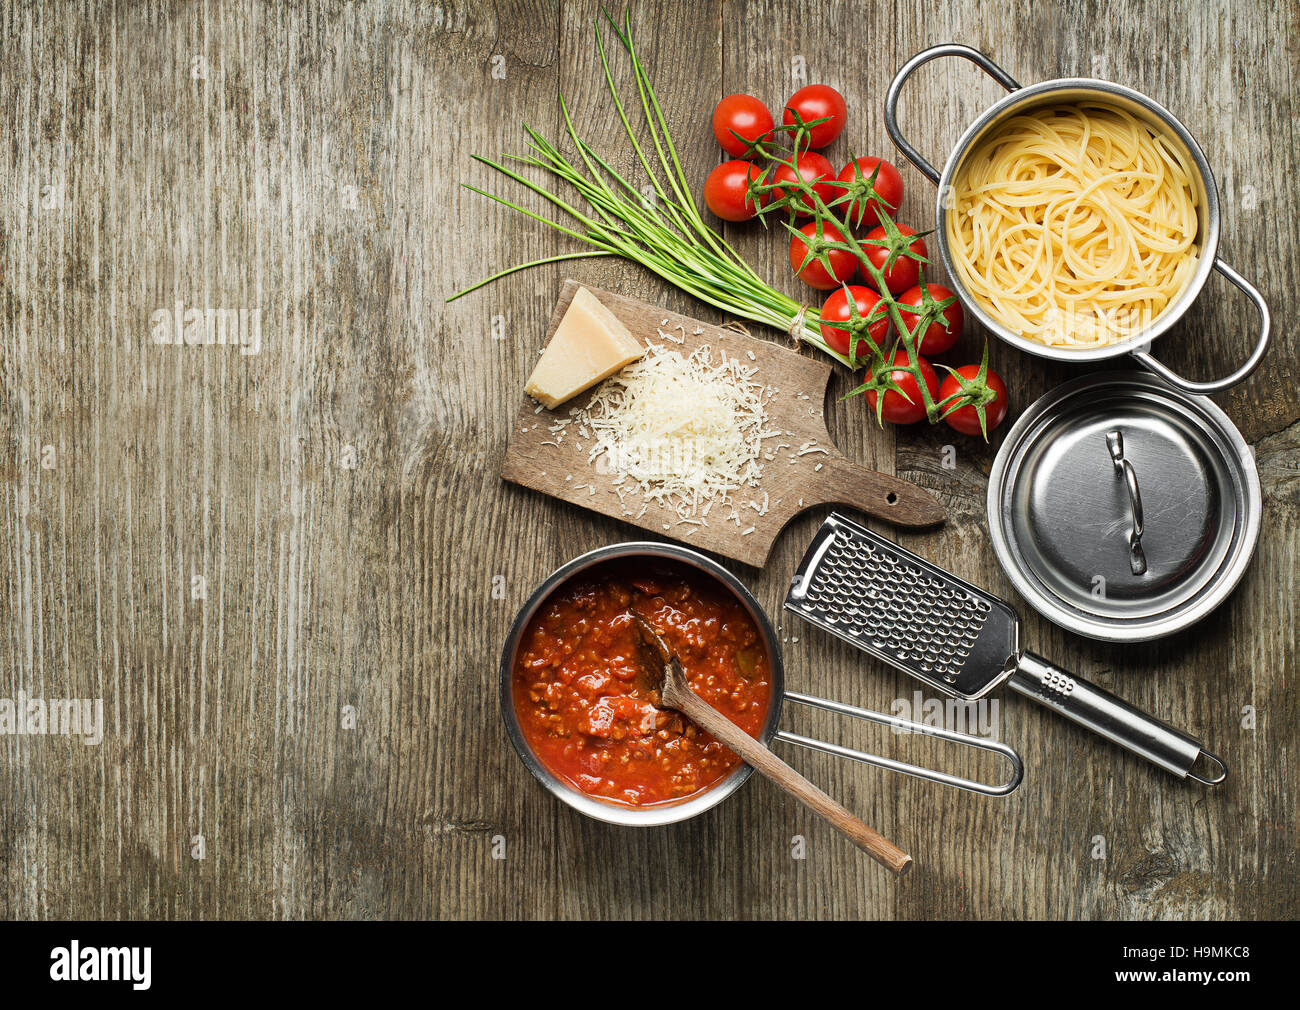 Pasta with bolognese sauce and parmesan cheese on wooden table Stock Photo